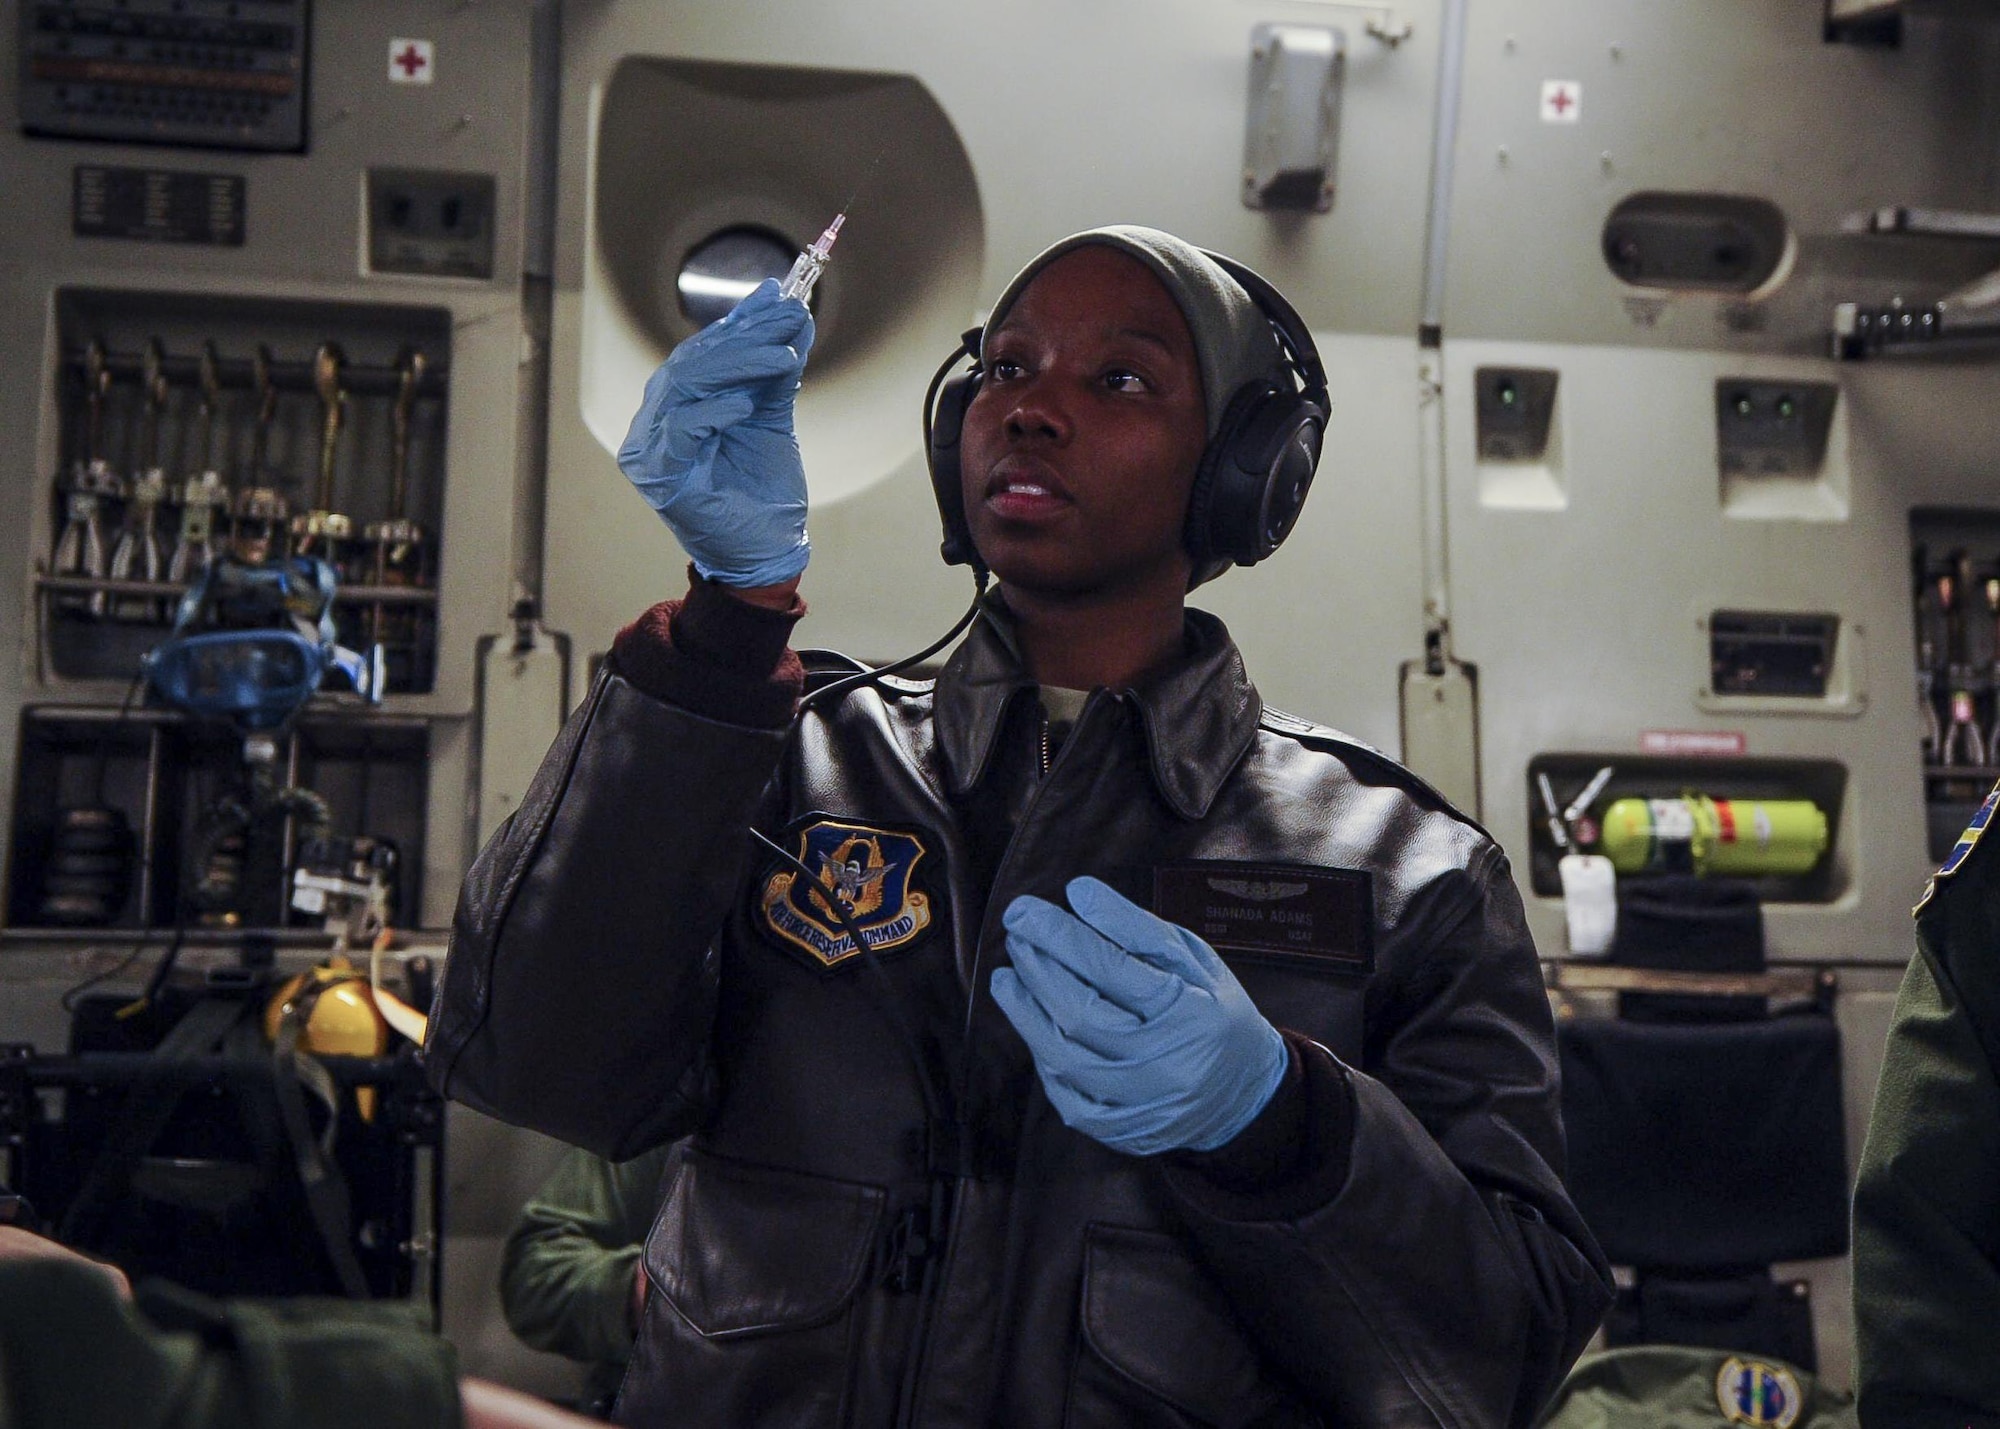 Staff Sgt. Shanada Adams, 315th Aeromedical Evacuation Squadron, tests sterilized needle before administering it onto a replicated human arm during a medical training exercise January 13, 2017, while on board a C-17 Globemaster III bound for Ramstein Air Base, Germany. Airmen from the 315th AES are able to conduct medical training, while in conjunction with real-world operations. (U.S. Air Force photo by Senior Airman Tom Brading)